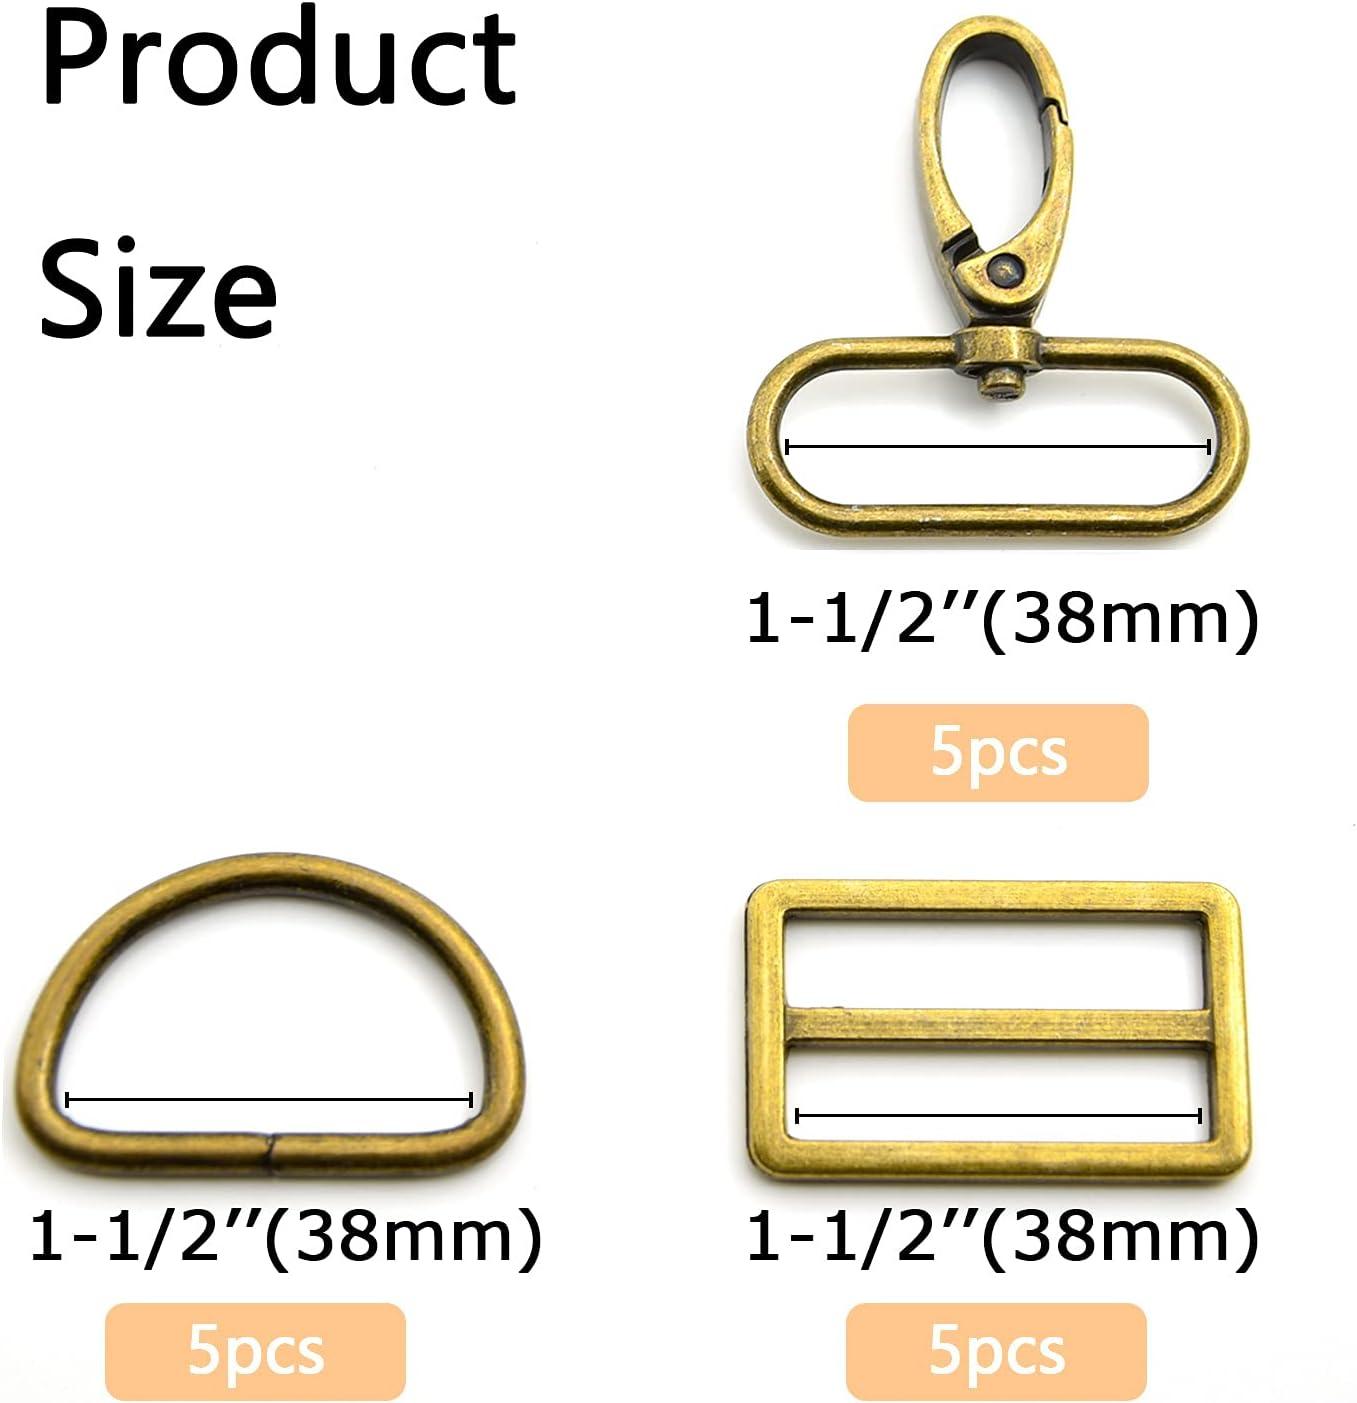 MELORDY 15pcs Metal Swivel Snaps Hooks with D Rings and Tri-Glides Slide Buckles for Key Lanyard Purse Bag Straps Dog Collars DIY Sewing Hardware